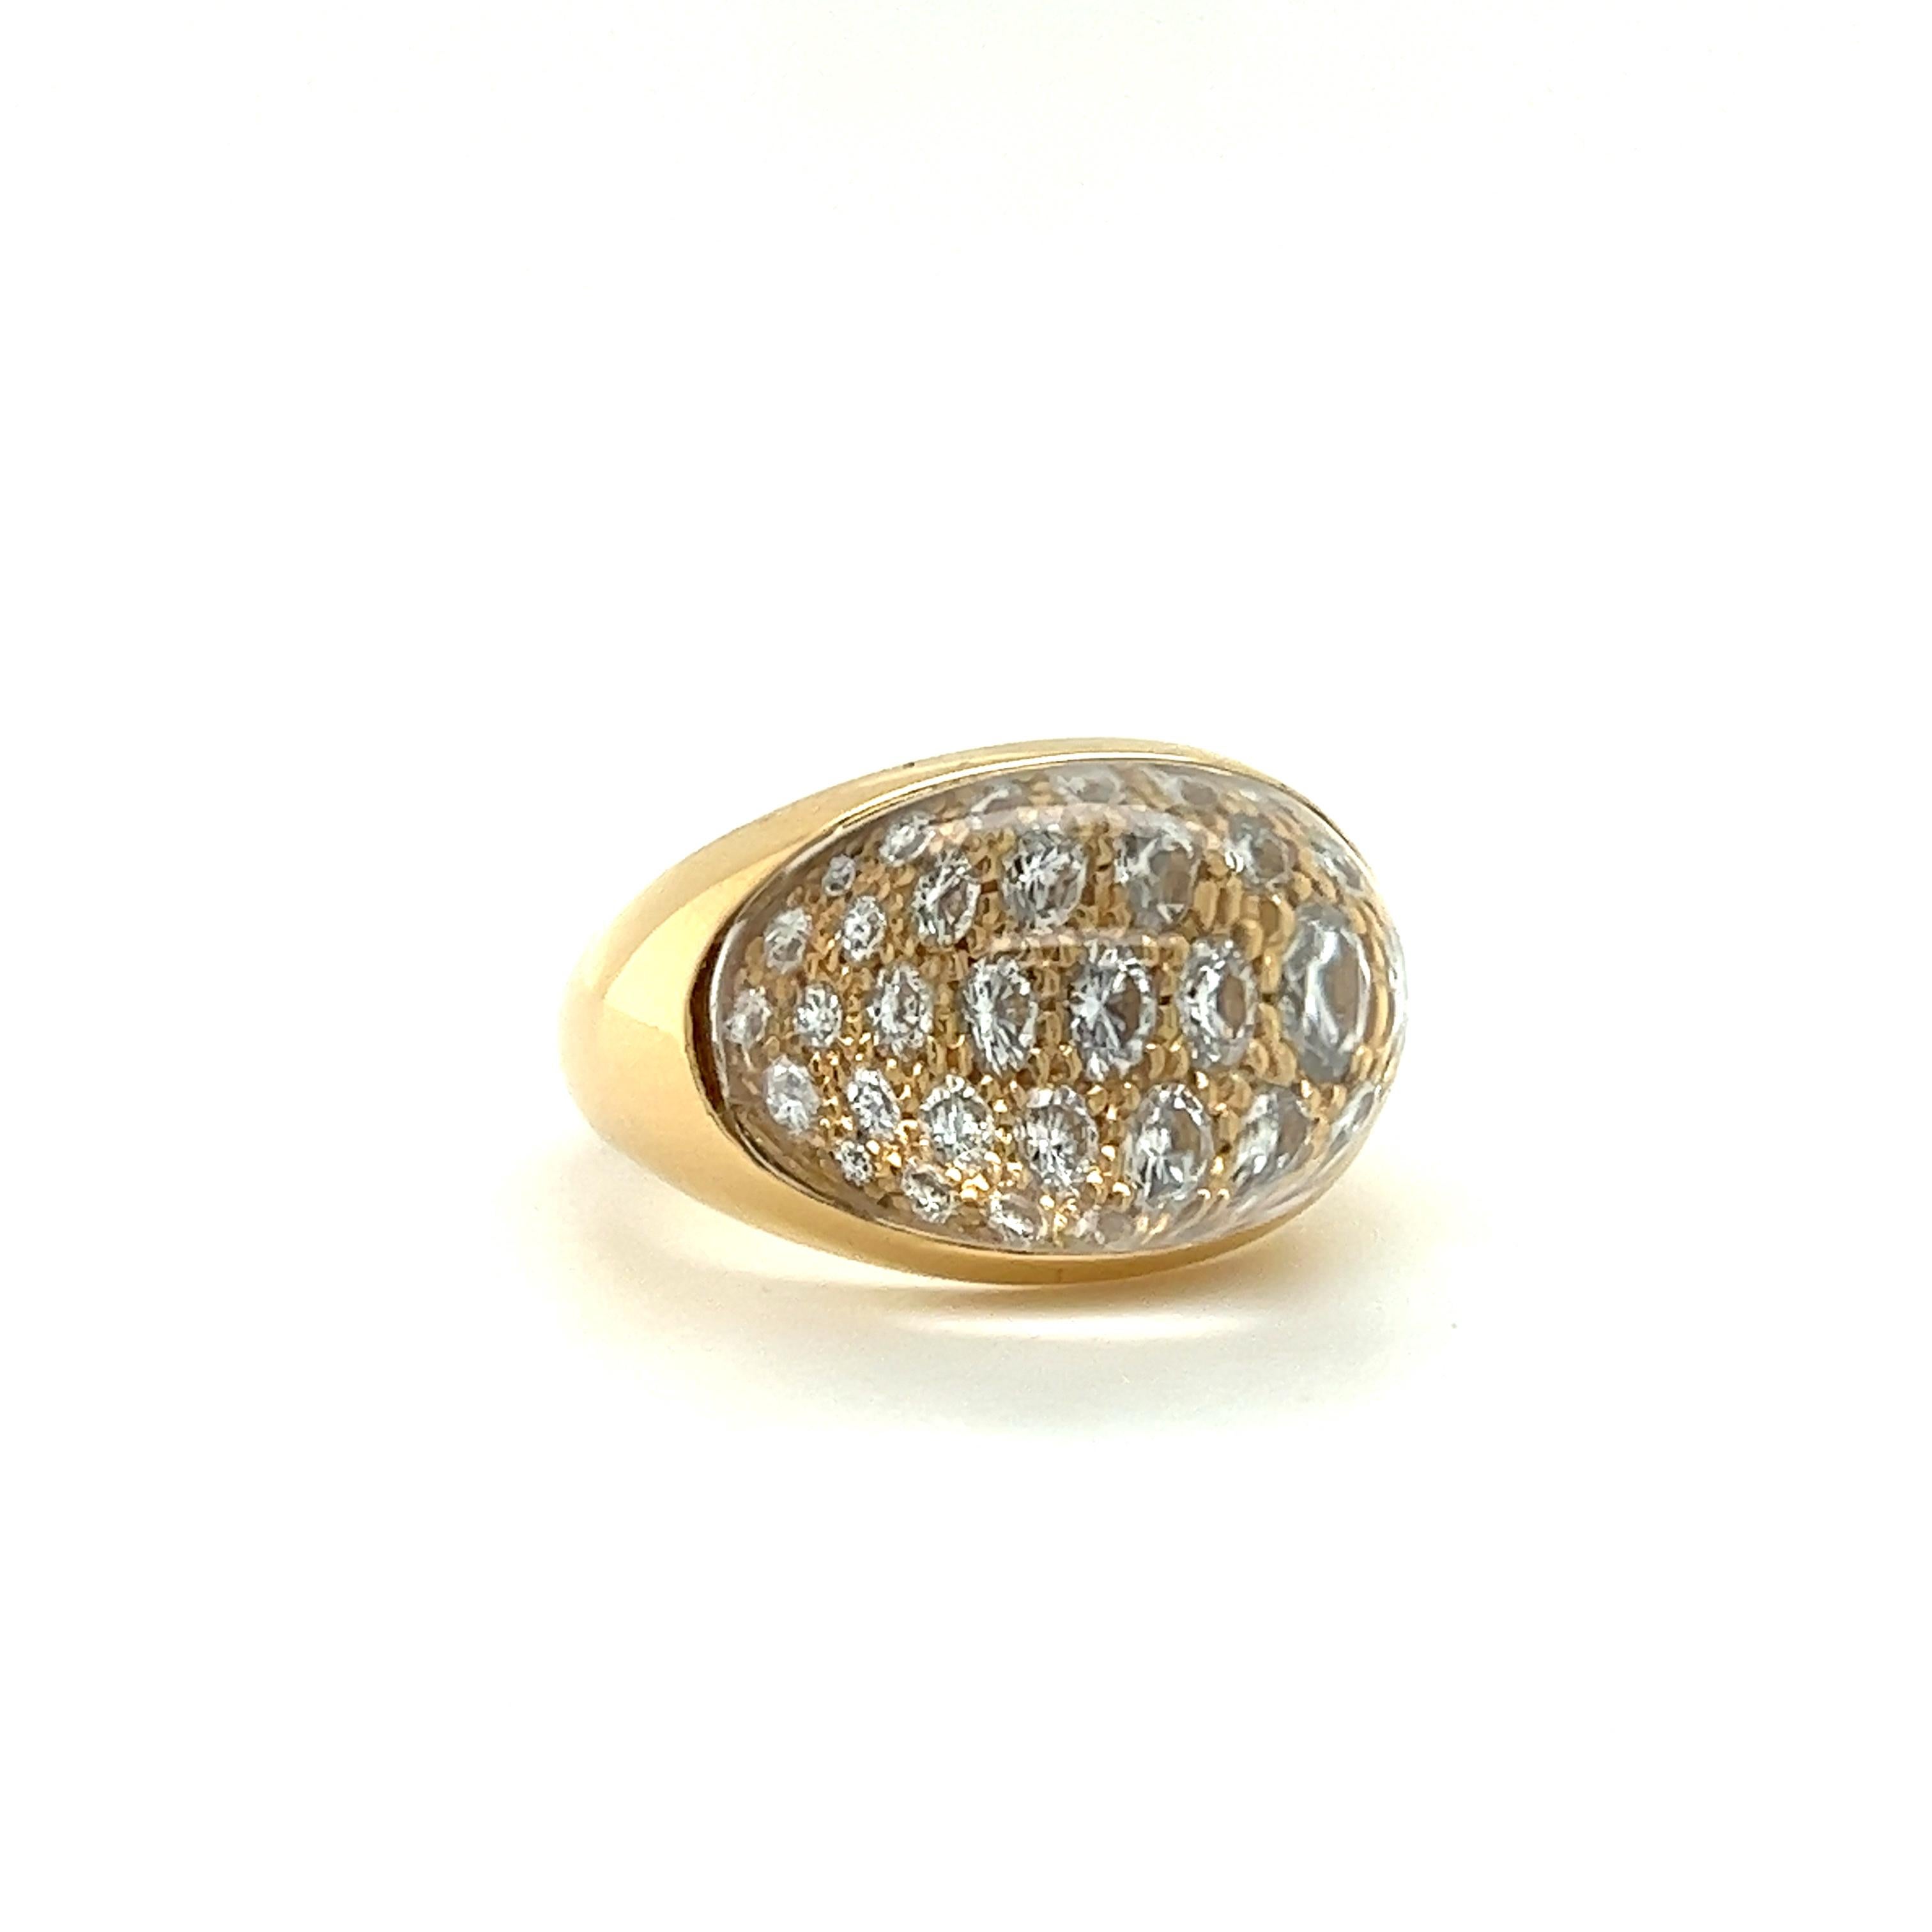 Round Cut Vintage Myst De Cartier Rock Crystal and Diamond Ring 18k Yellow Gold